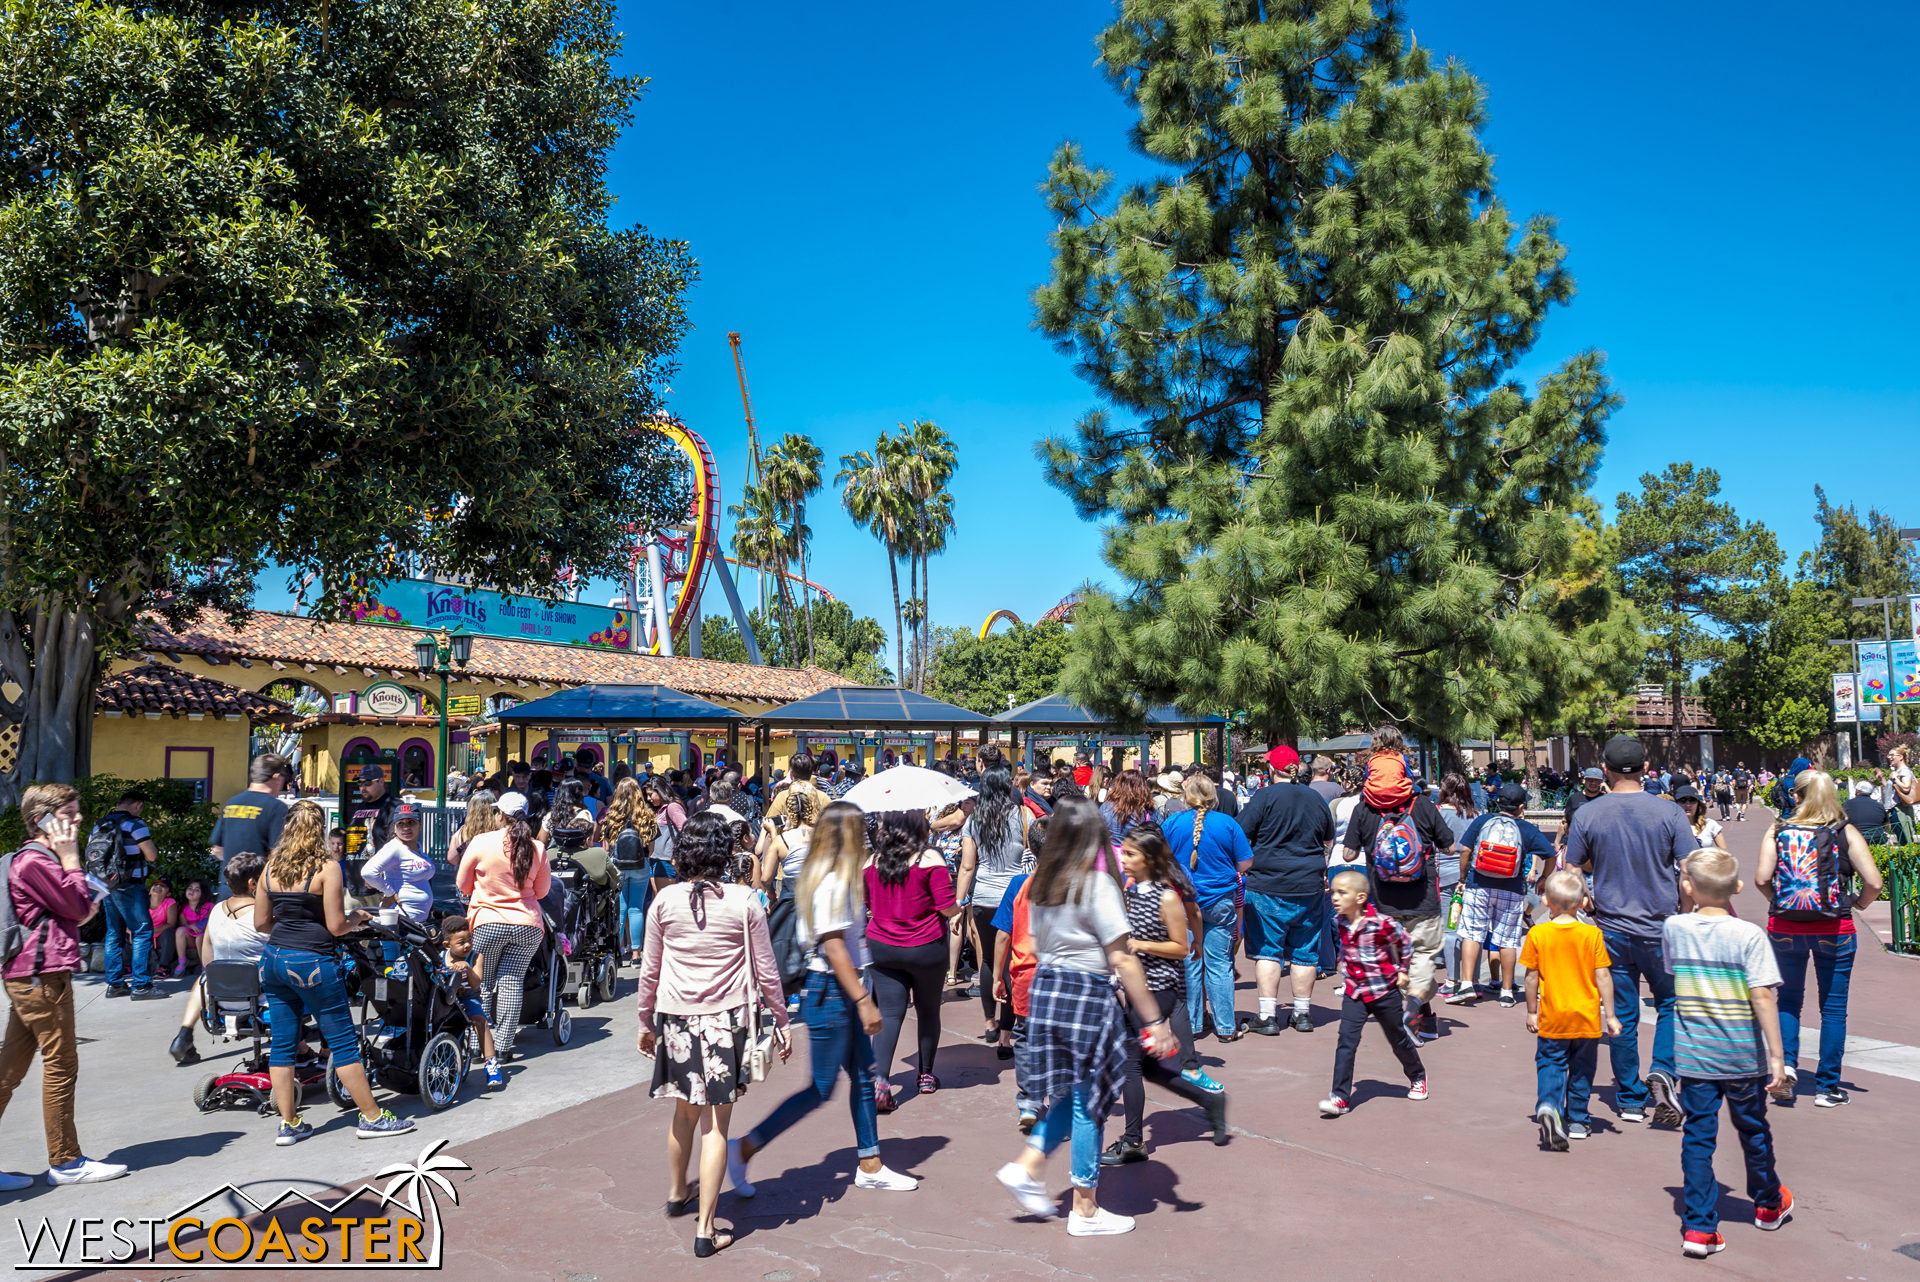  There are three banks of metal detectors on each side of the entrance plaza, each with two metal detectors, for a total of twelve detectors--each with its own bag station (I'm looking at you, Disney)--to screen guests.&nbsp; And they're under perman